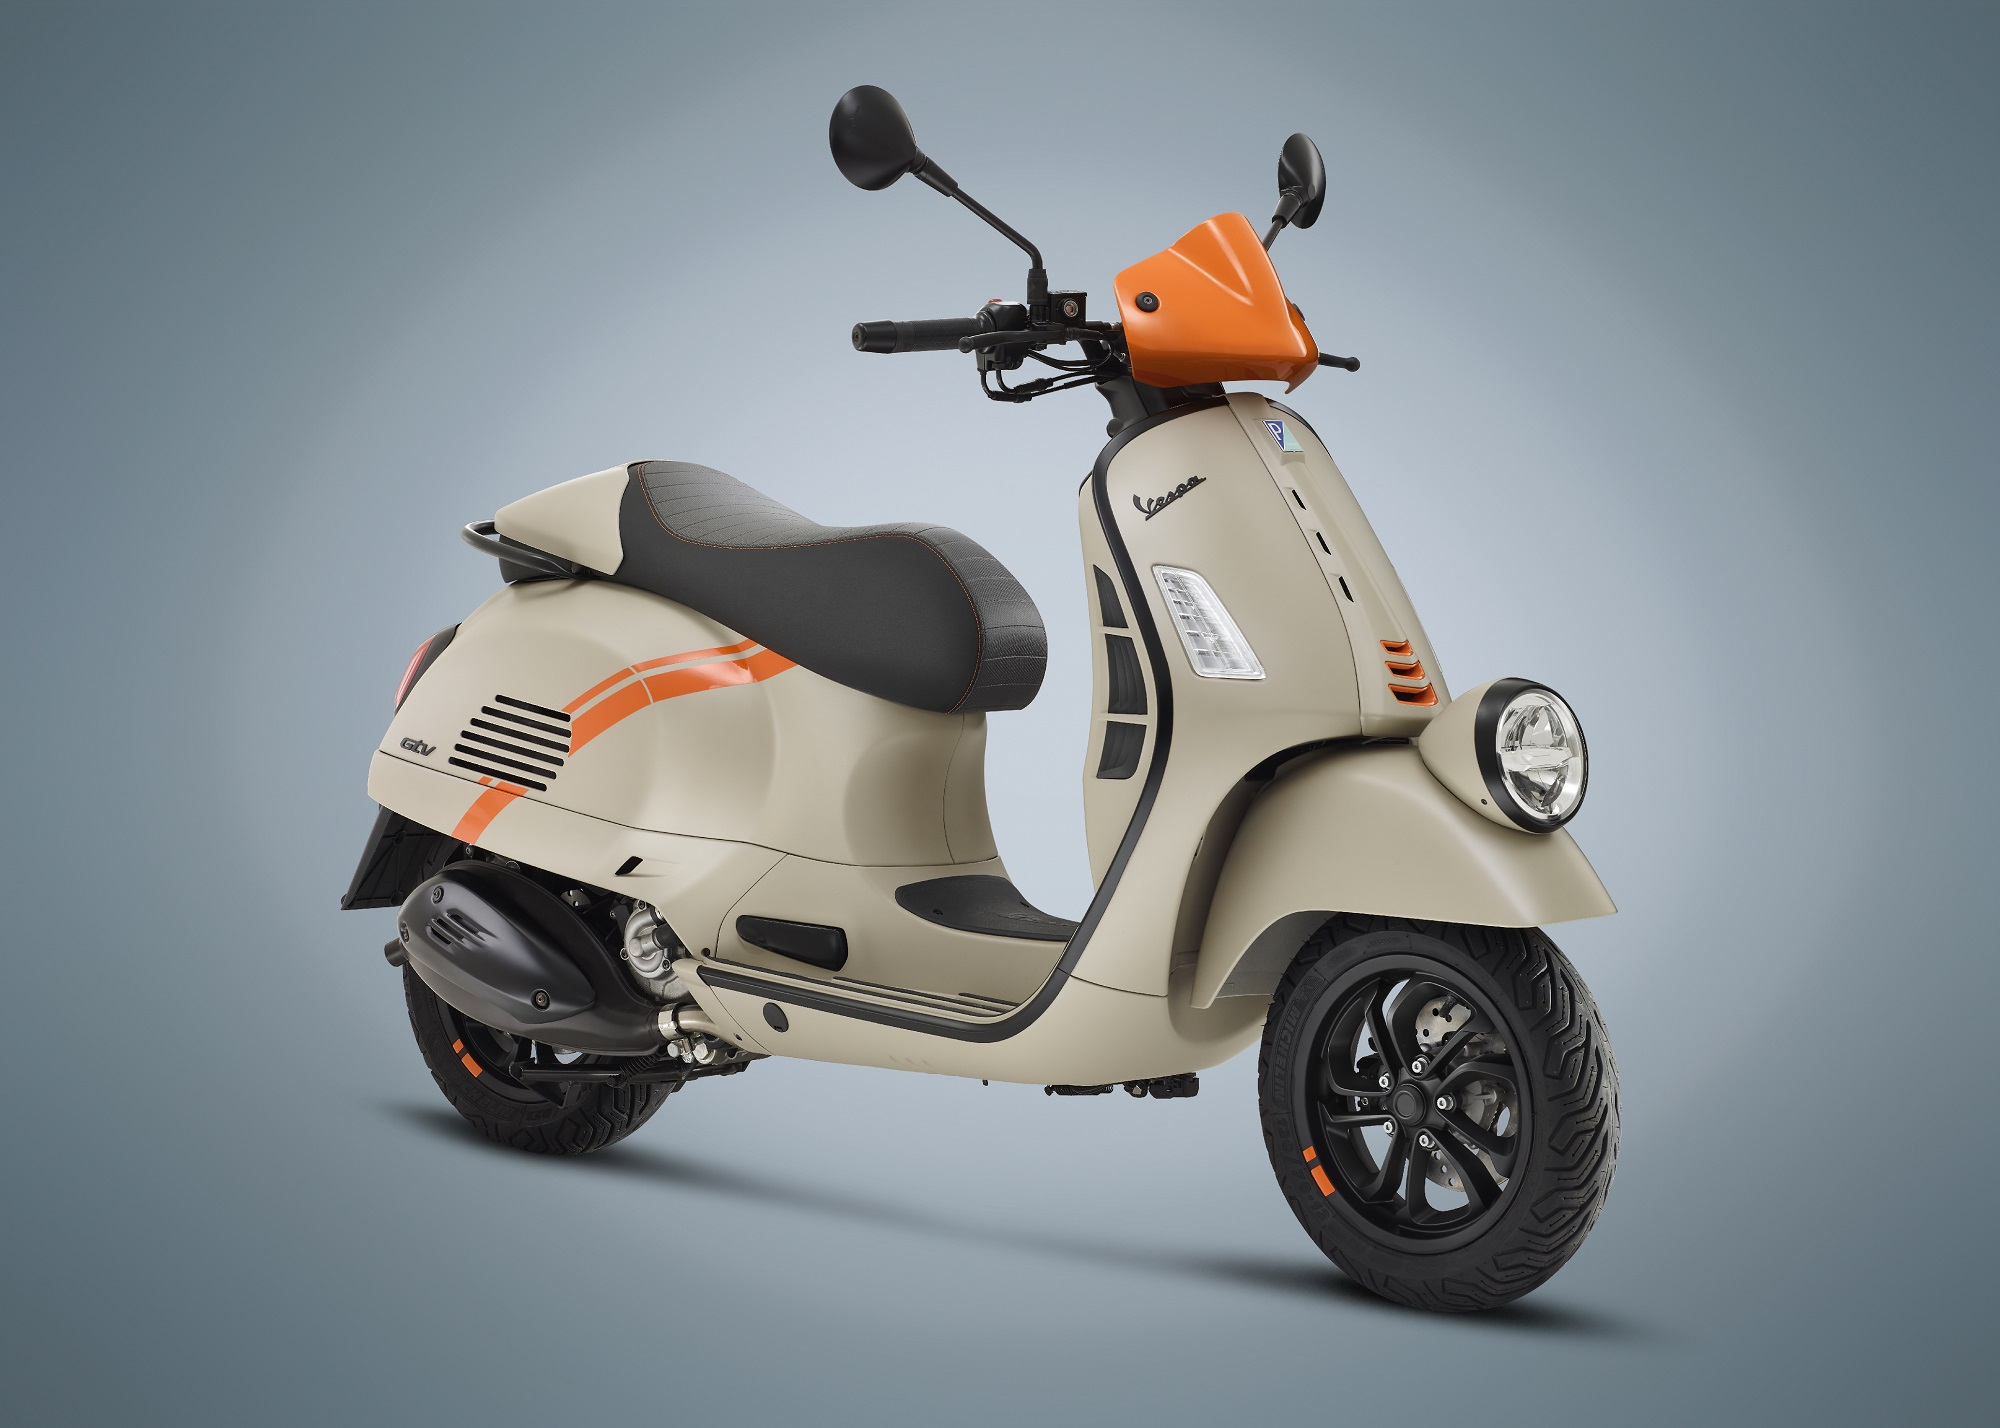 Vespa's most powerful scooter shown to put dolce vita on fastforward